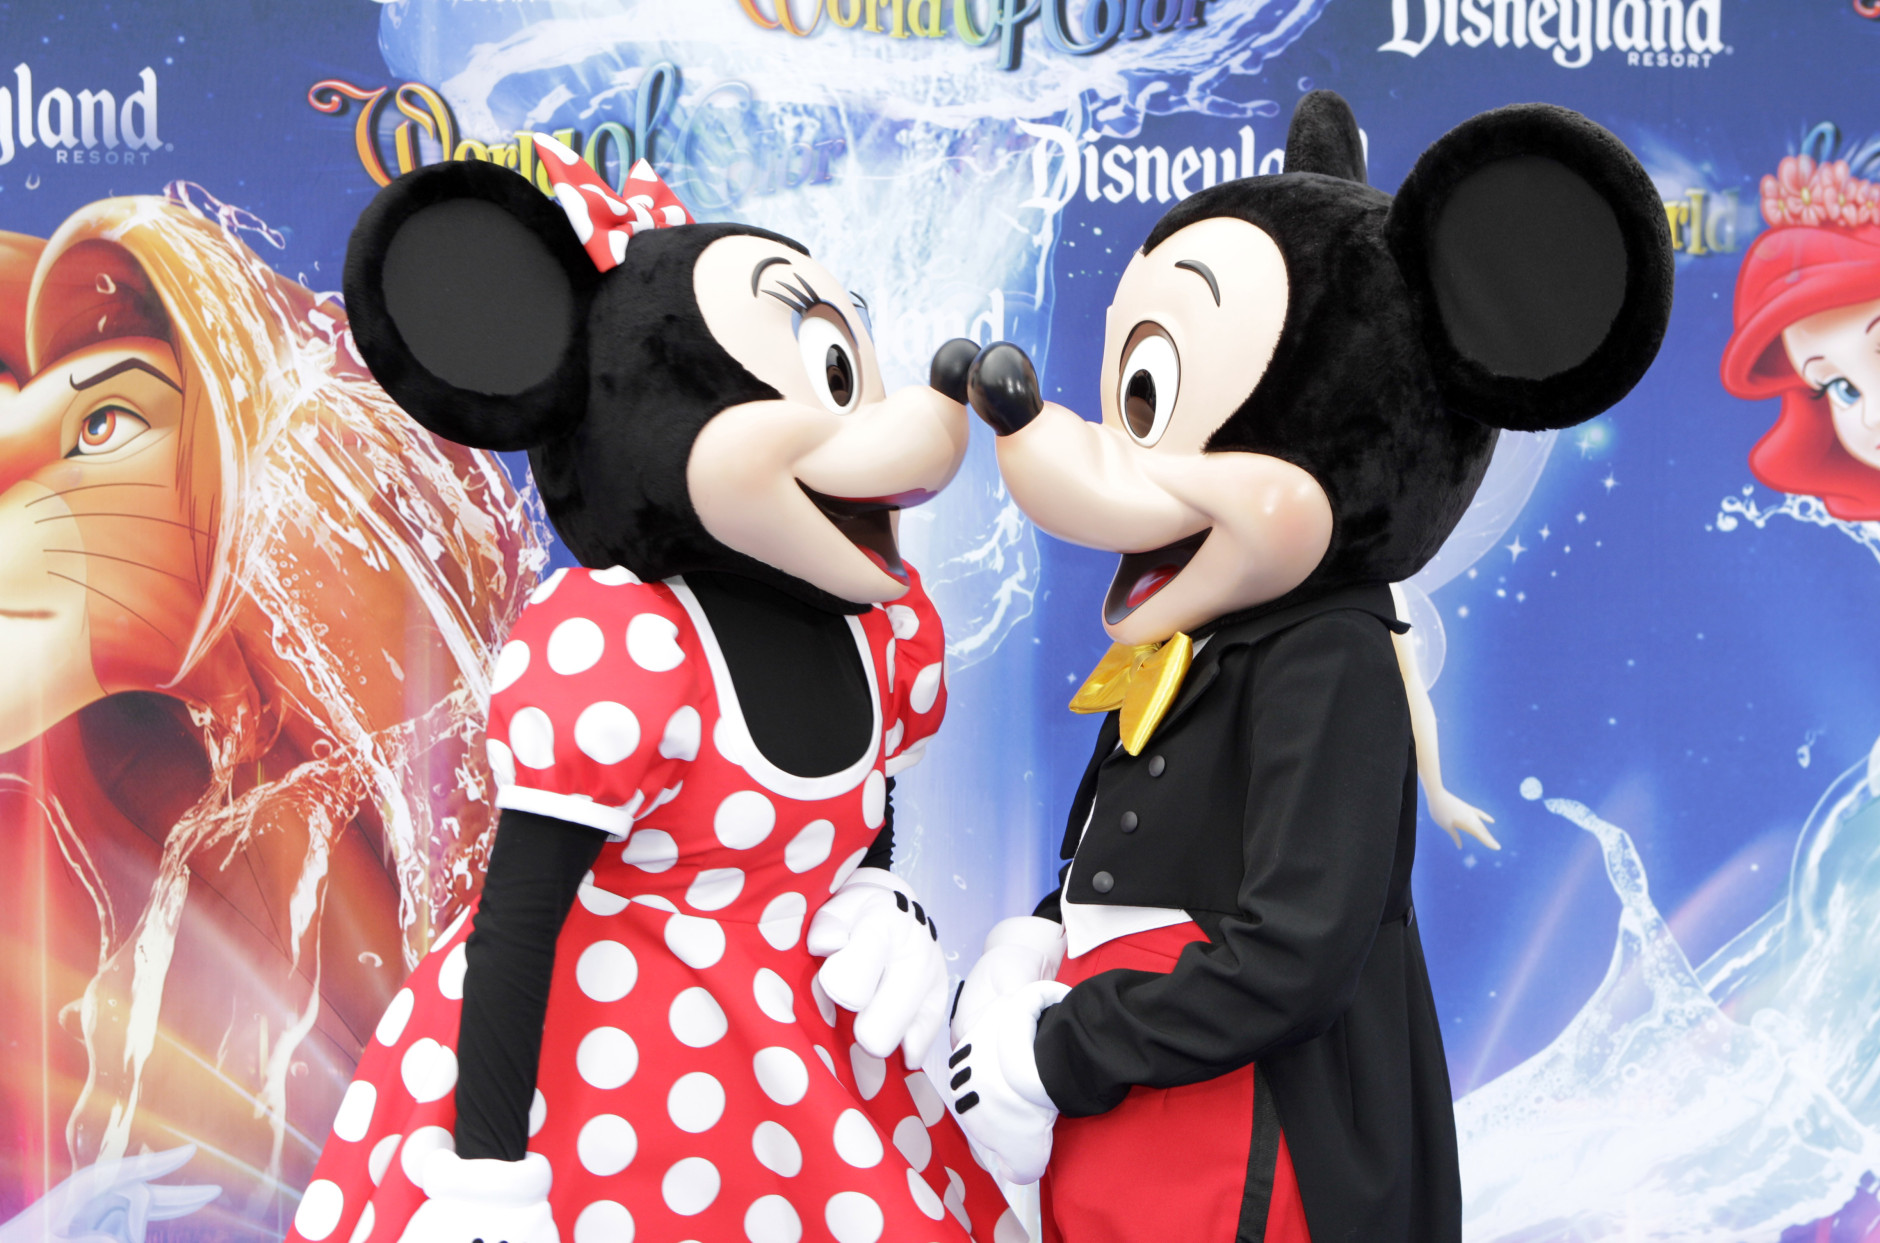 Mickey Mouse and Minnie Mouse at the premiere of World of Color water show at Disneyland in Anaheim, Calif., Thursday, June 10, 2010. (AP Photo/Jae C. Hong)